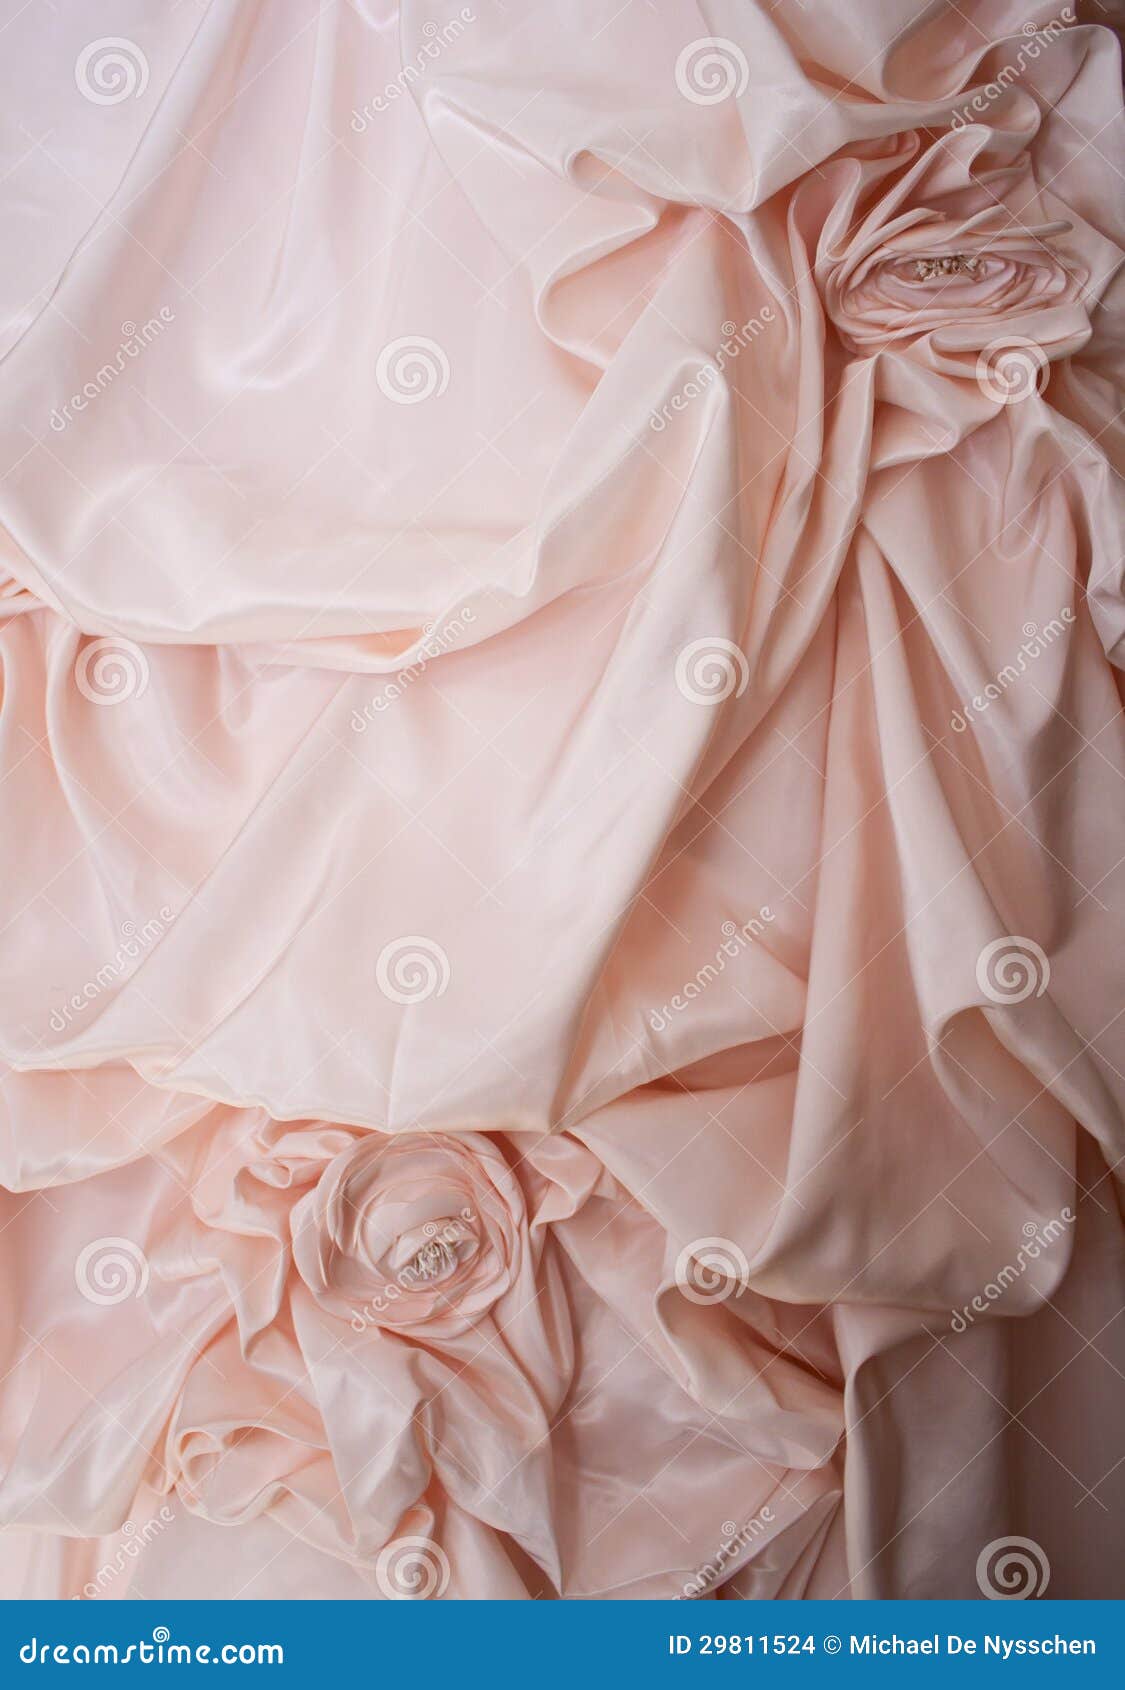 Racked Glossary: Everything You Need To Know About Wedding Gown Fabrics -  Racked